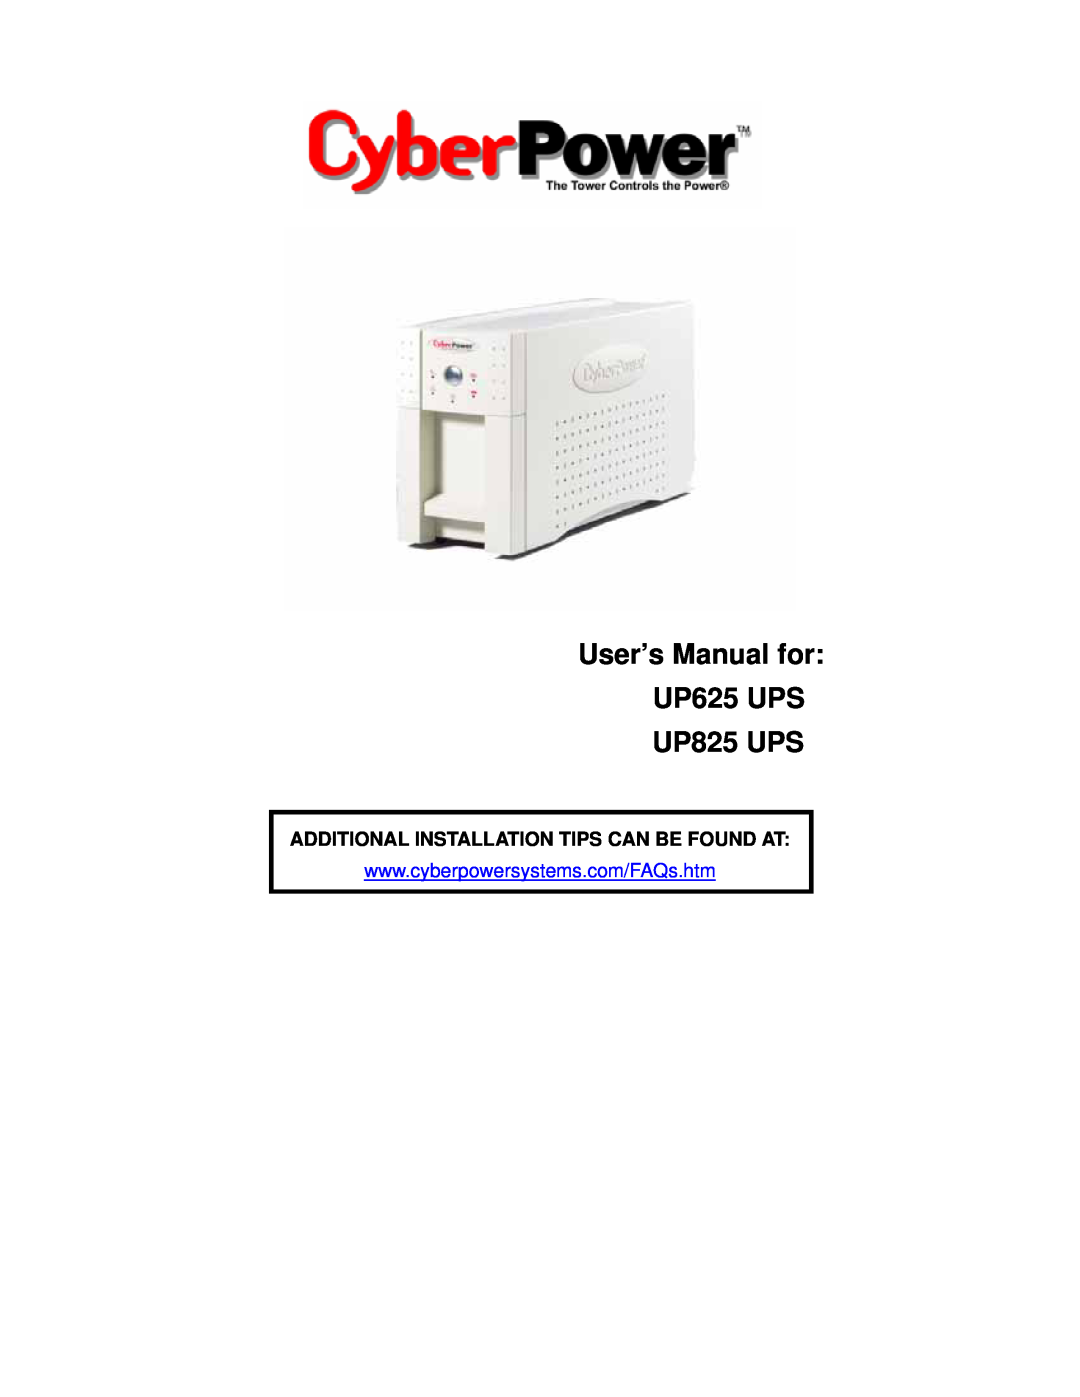 CyberPower Systems user manual Additional Installation Tips Can Be Found At, User’s Manual for UP625 UPS UP825 UPS 